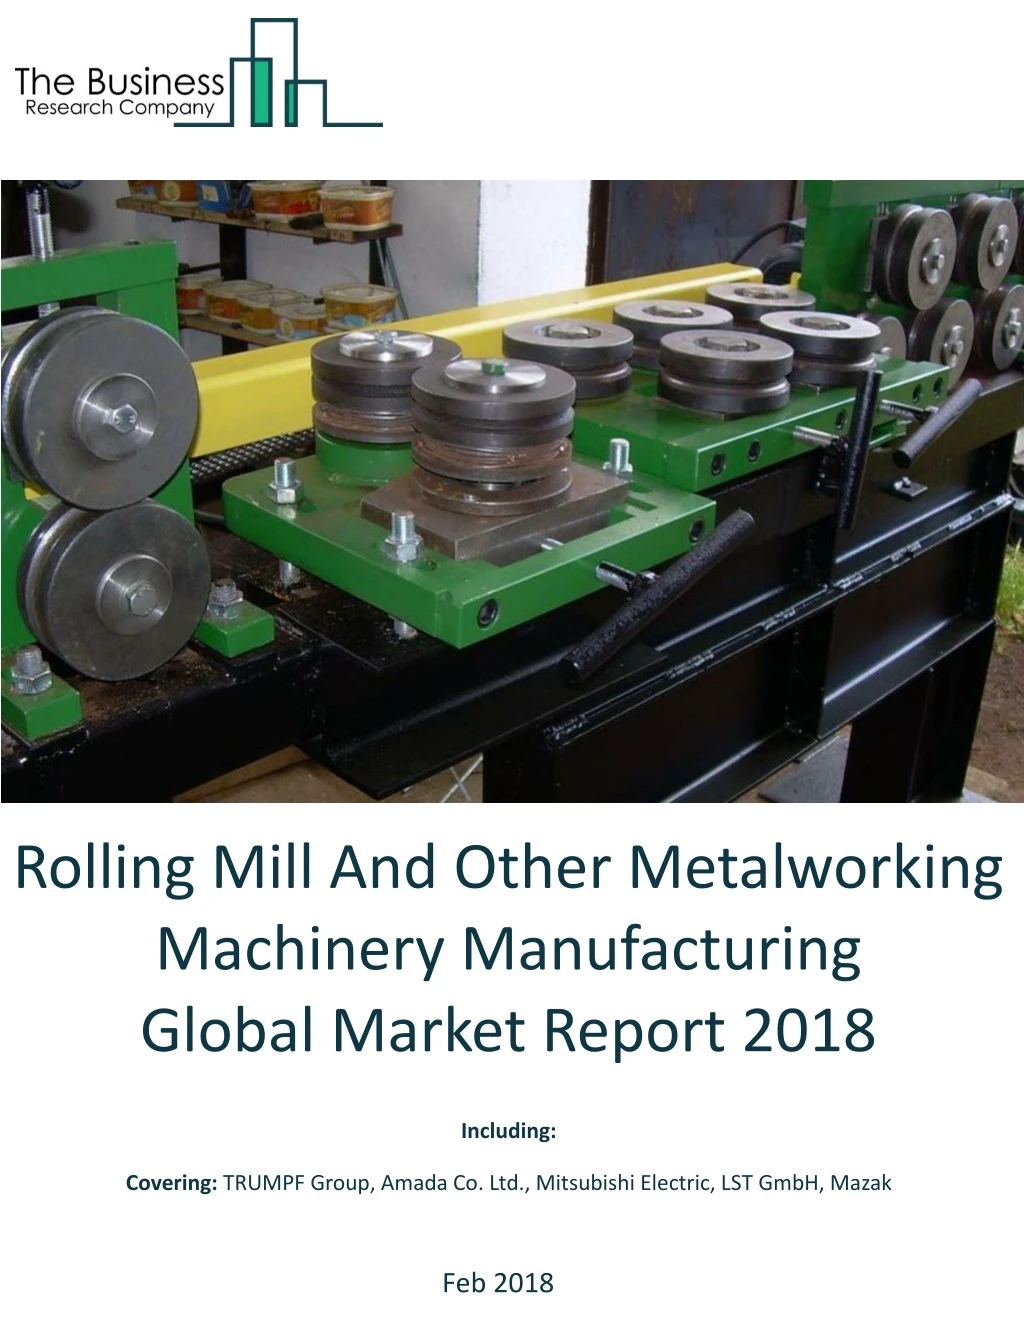 rolling mill and other metalworking machinery